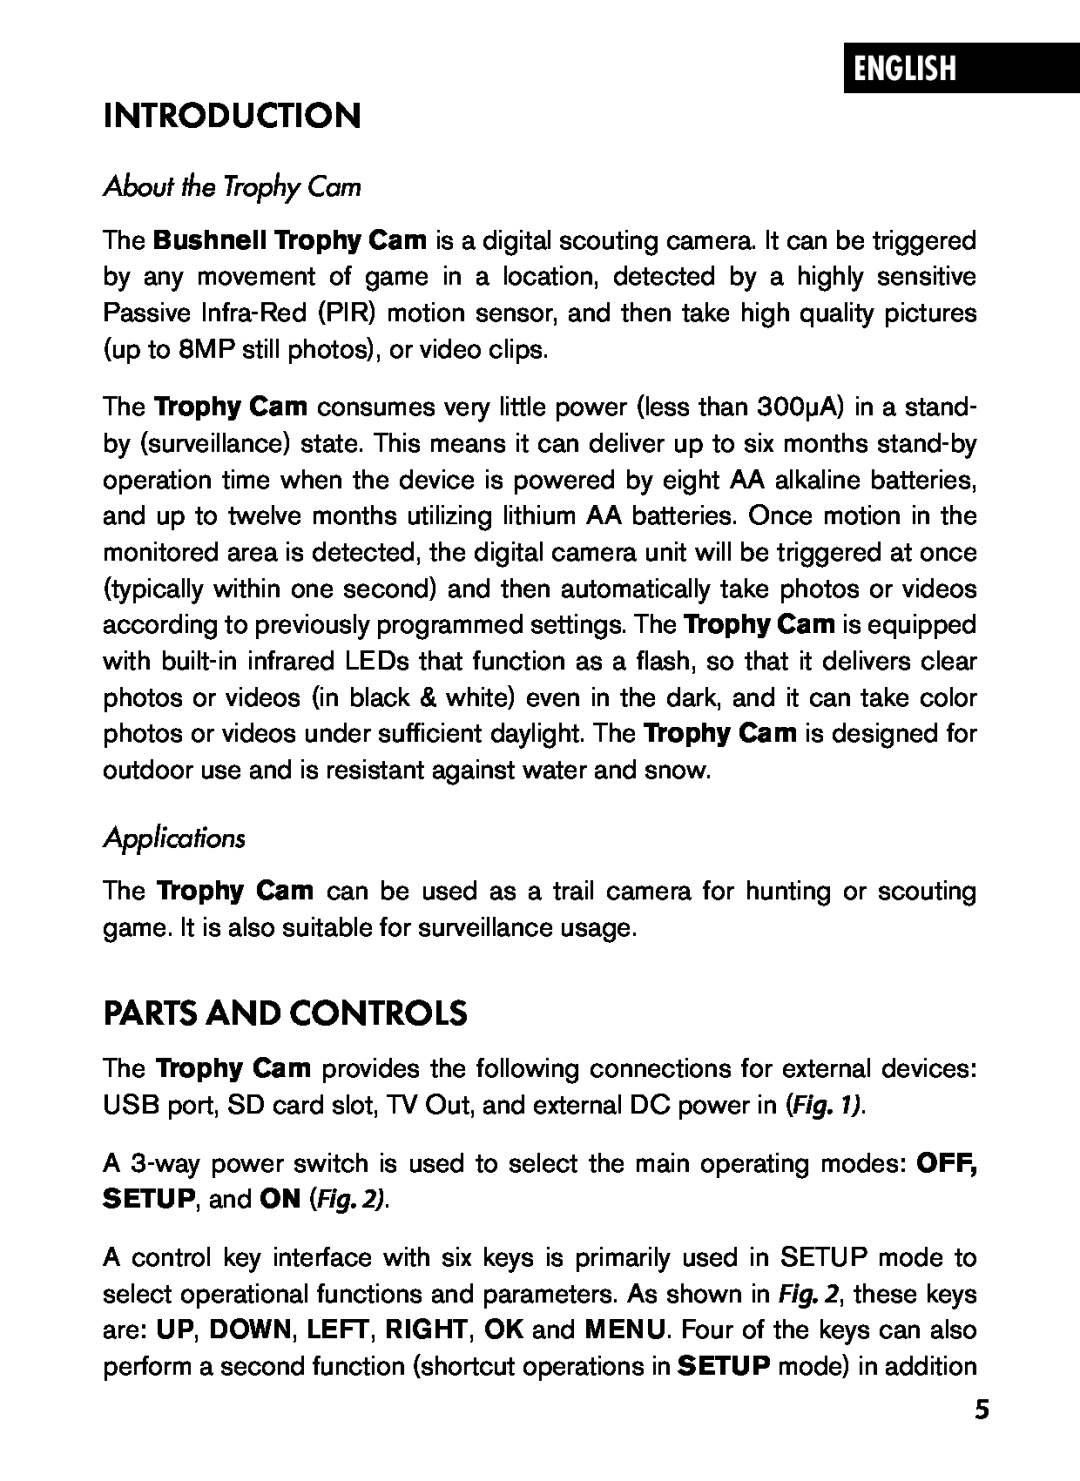 Bushnell 119435, 119455, 119445 Introduction, Parts And Controls, English, About the Trophy Cam, Applications 